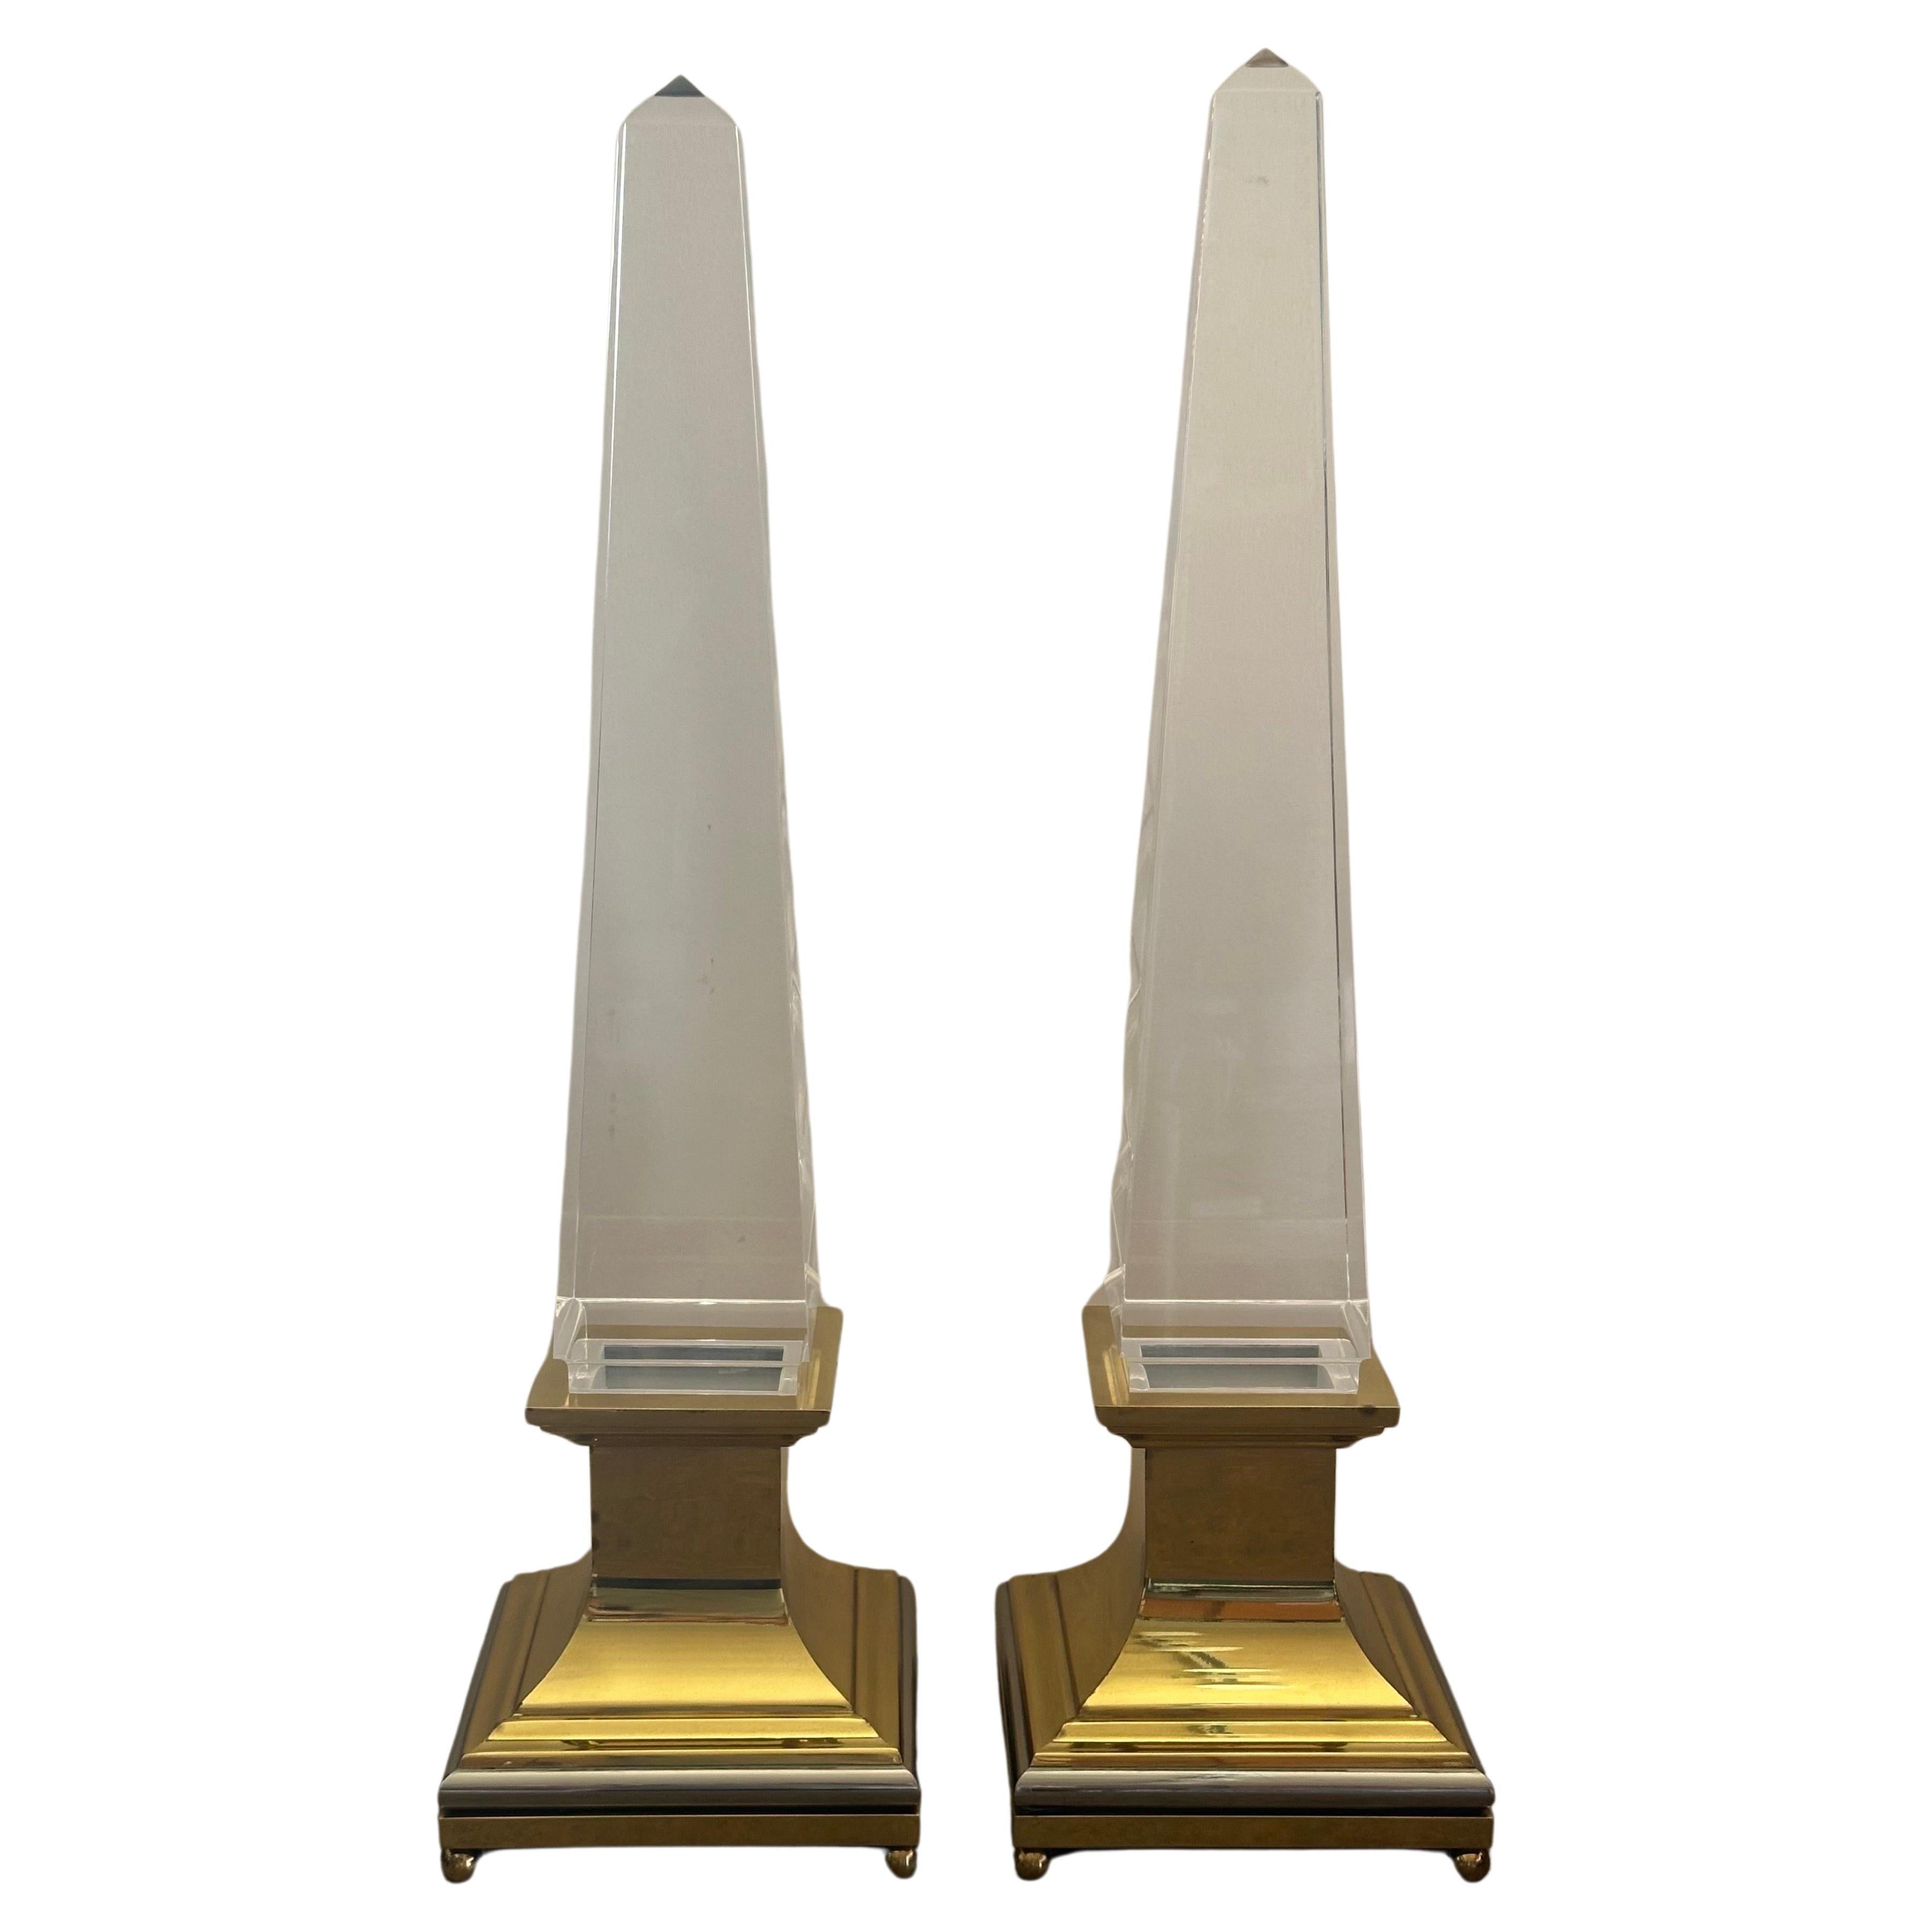 Hollywood Regency Pair of Lucite and Brass Obelisk Table Lamps by Sandro Petti for Maison Jansen For Sale